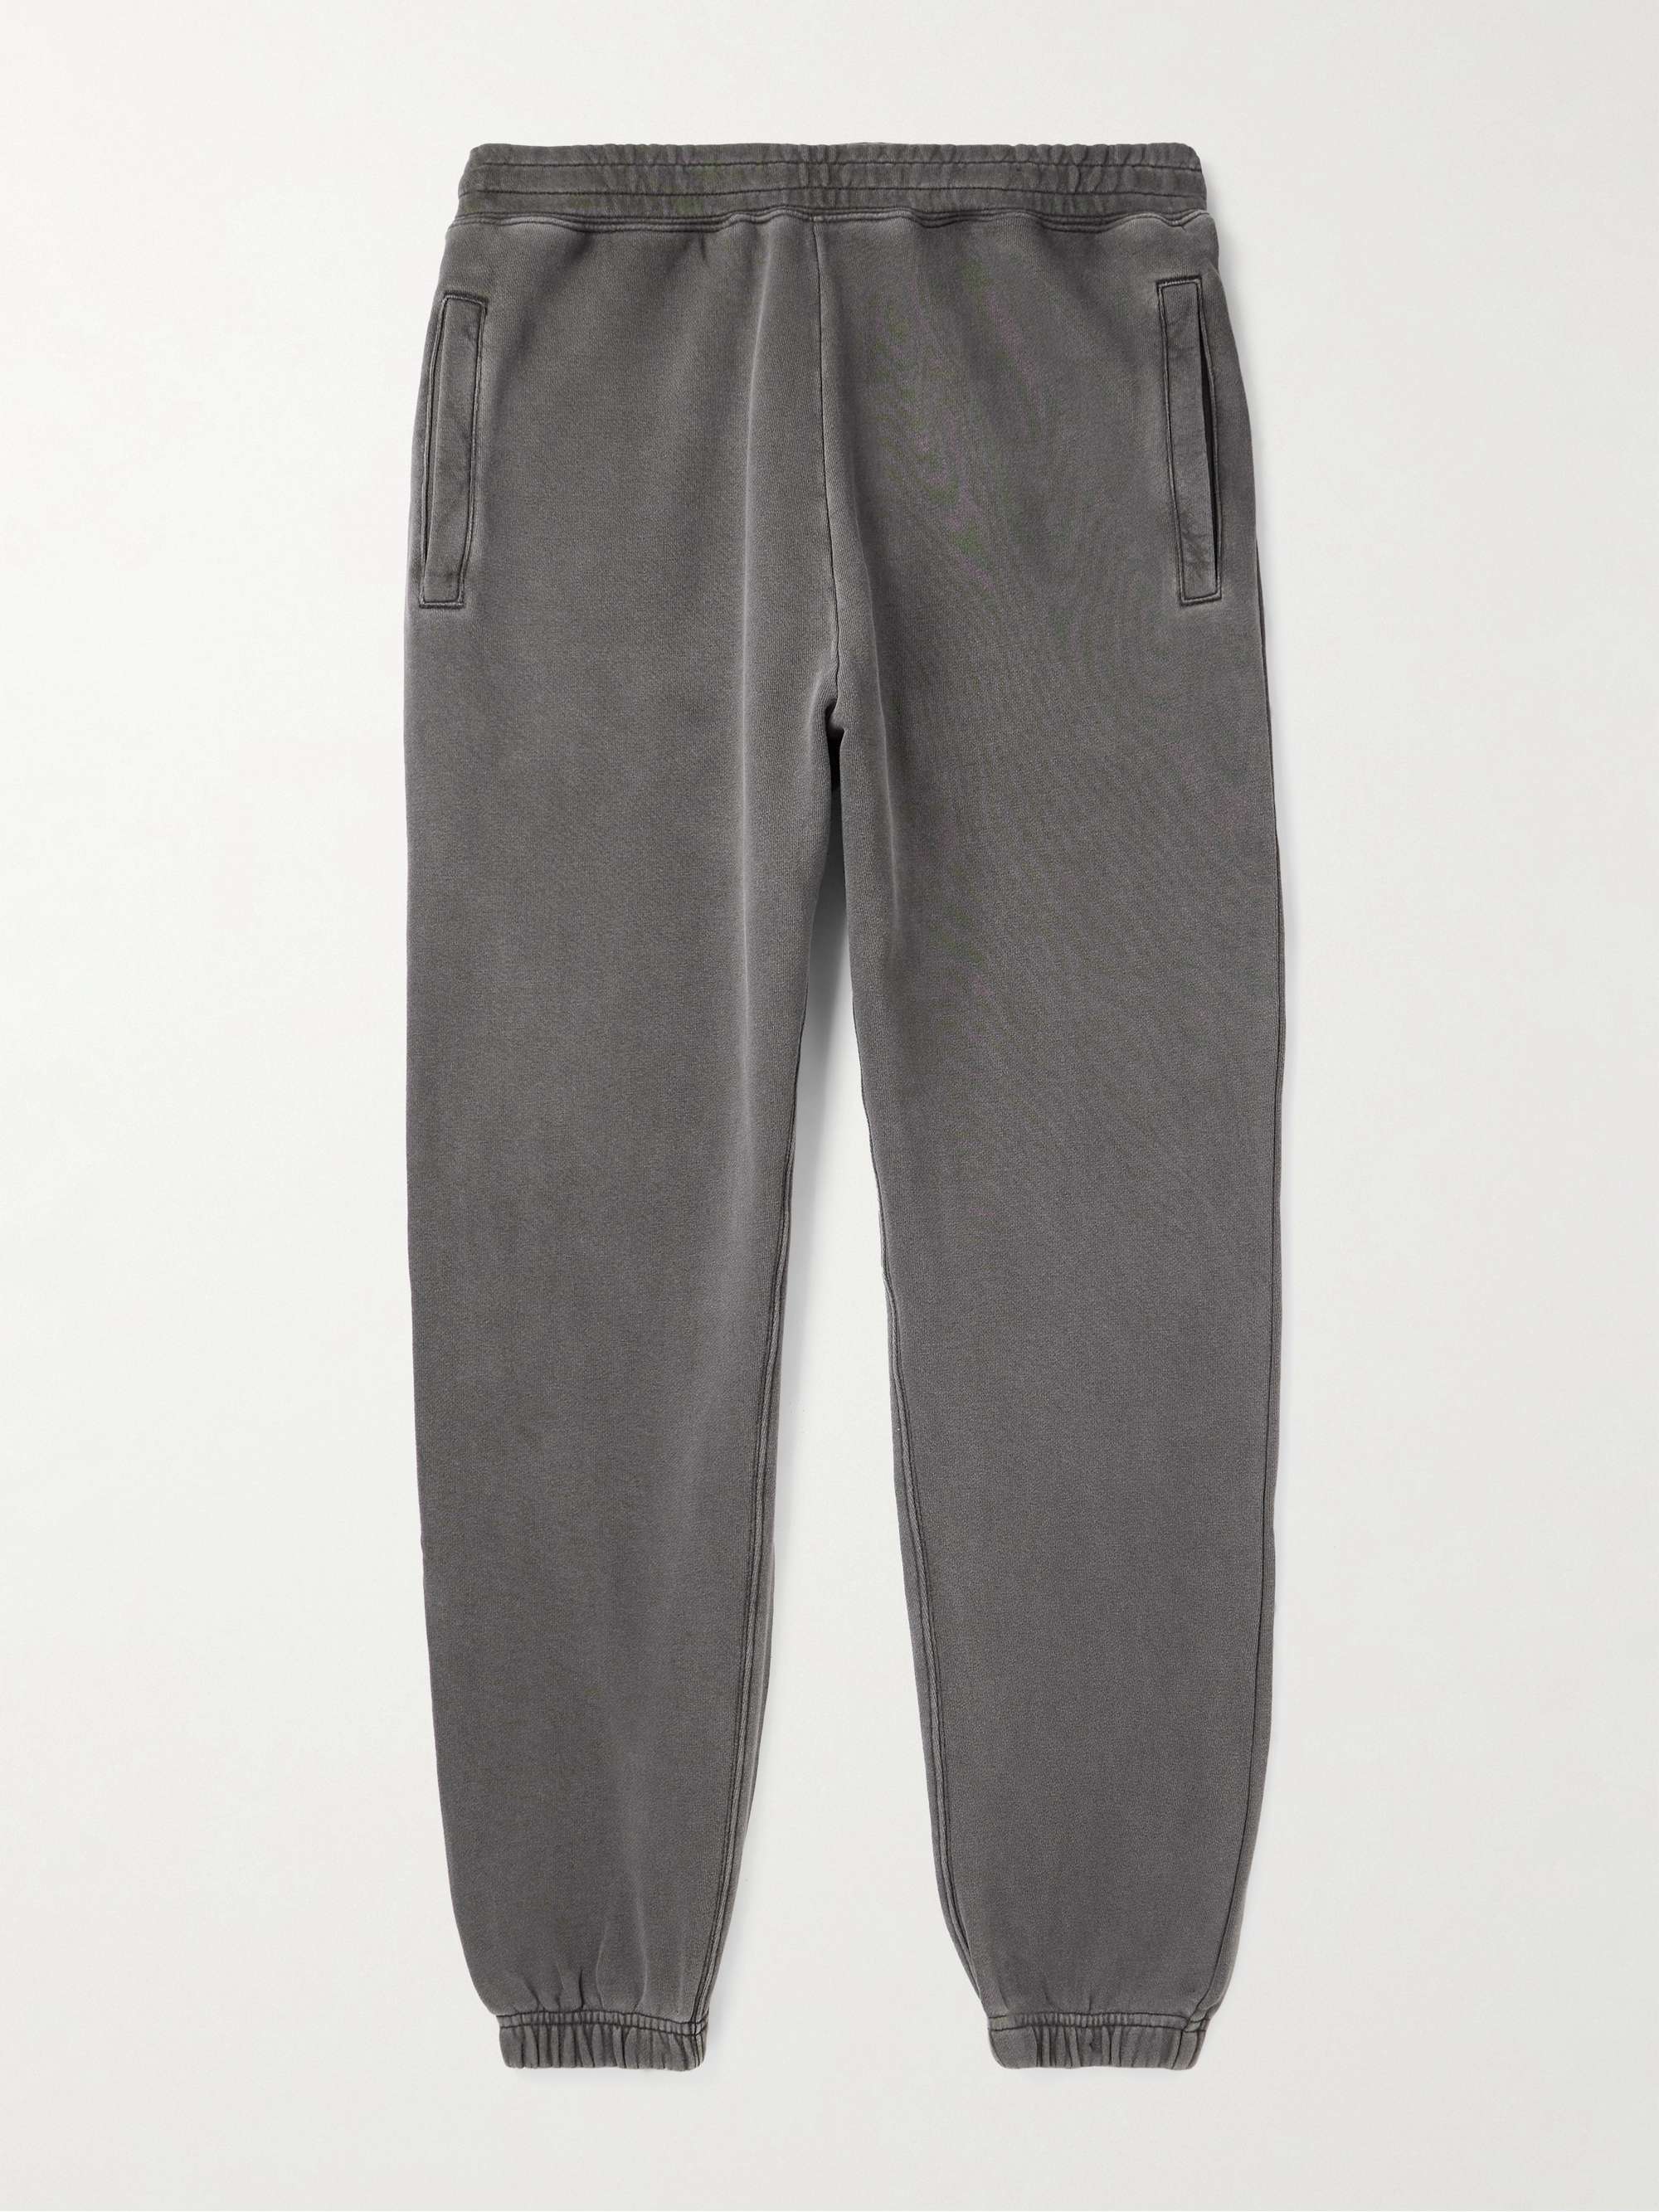 CARHARTT WIP Nelson Tapered Garment-Dyed Cotton-Jersey Sweatpants